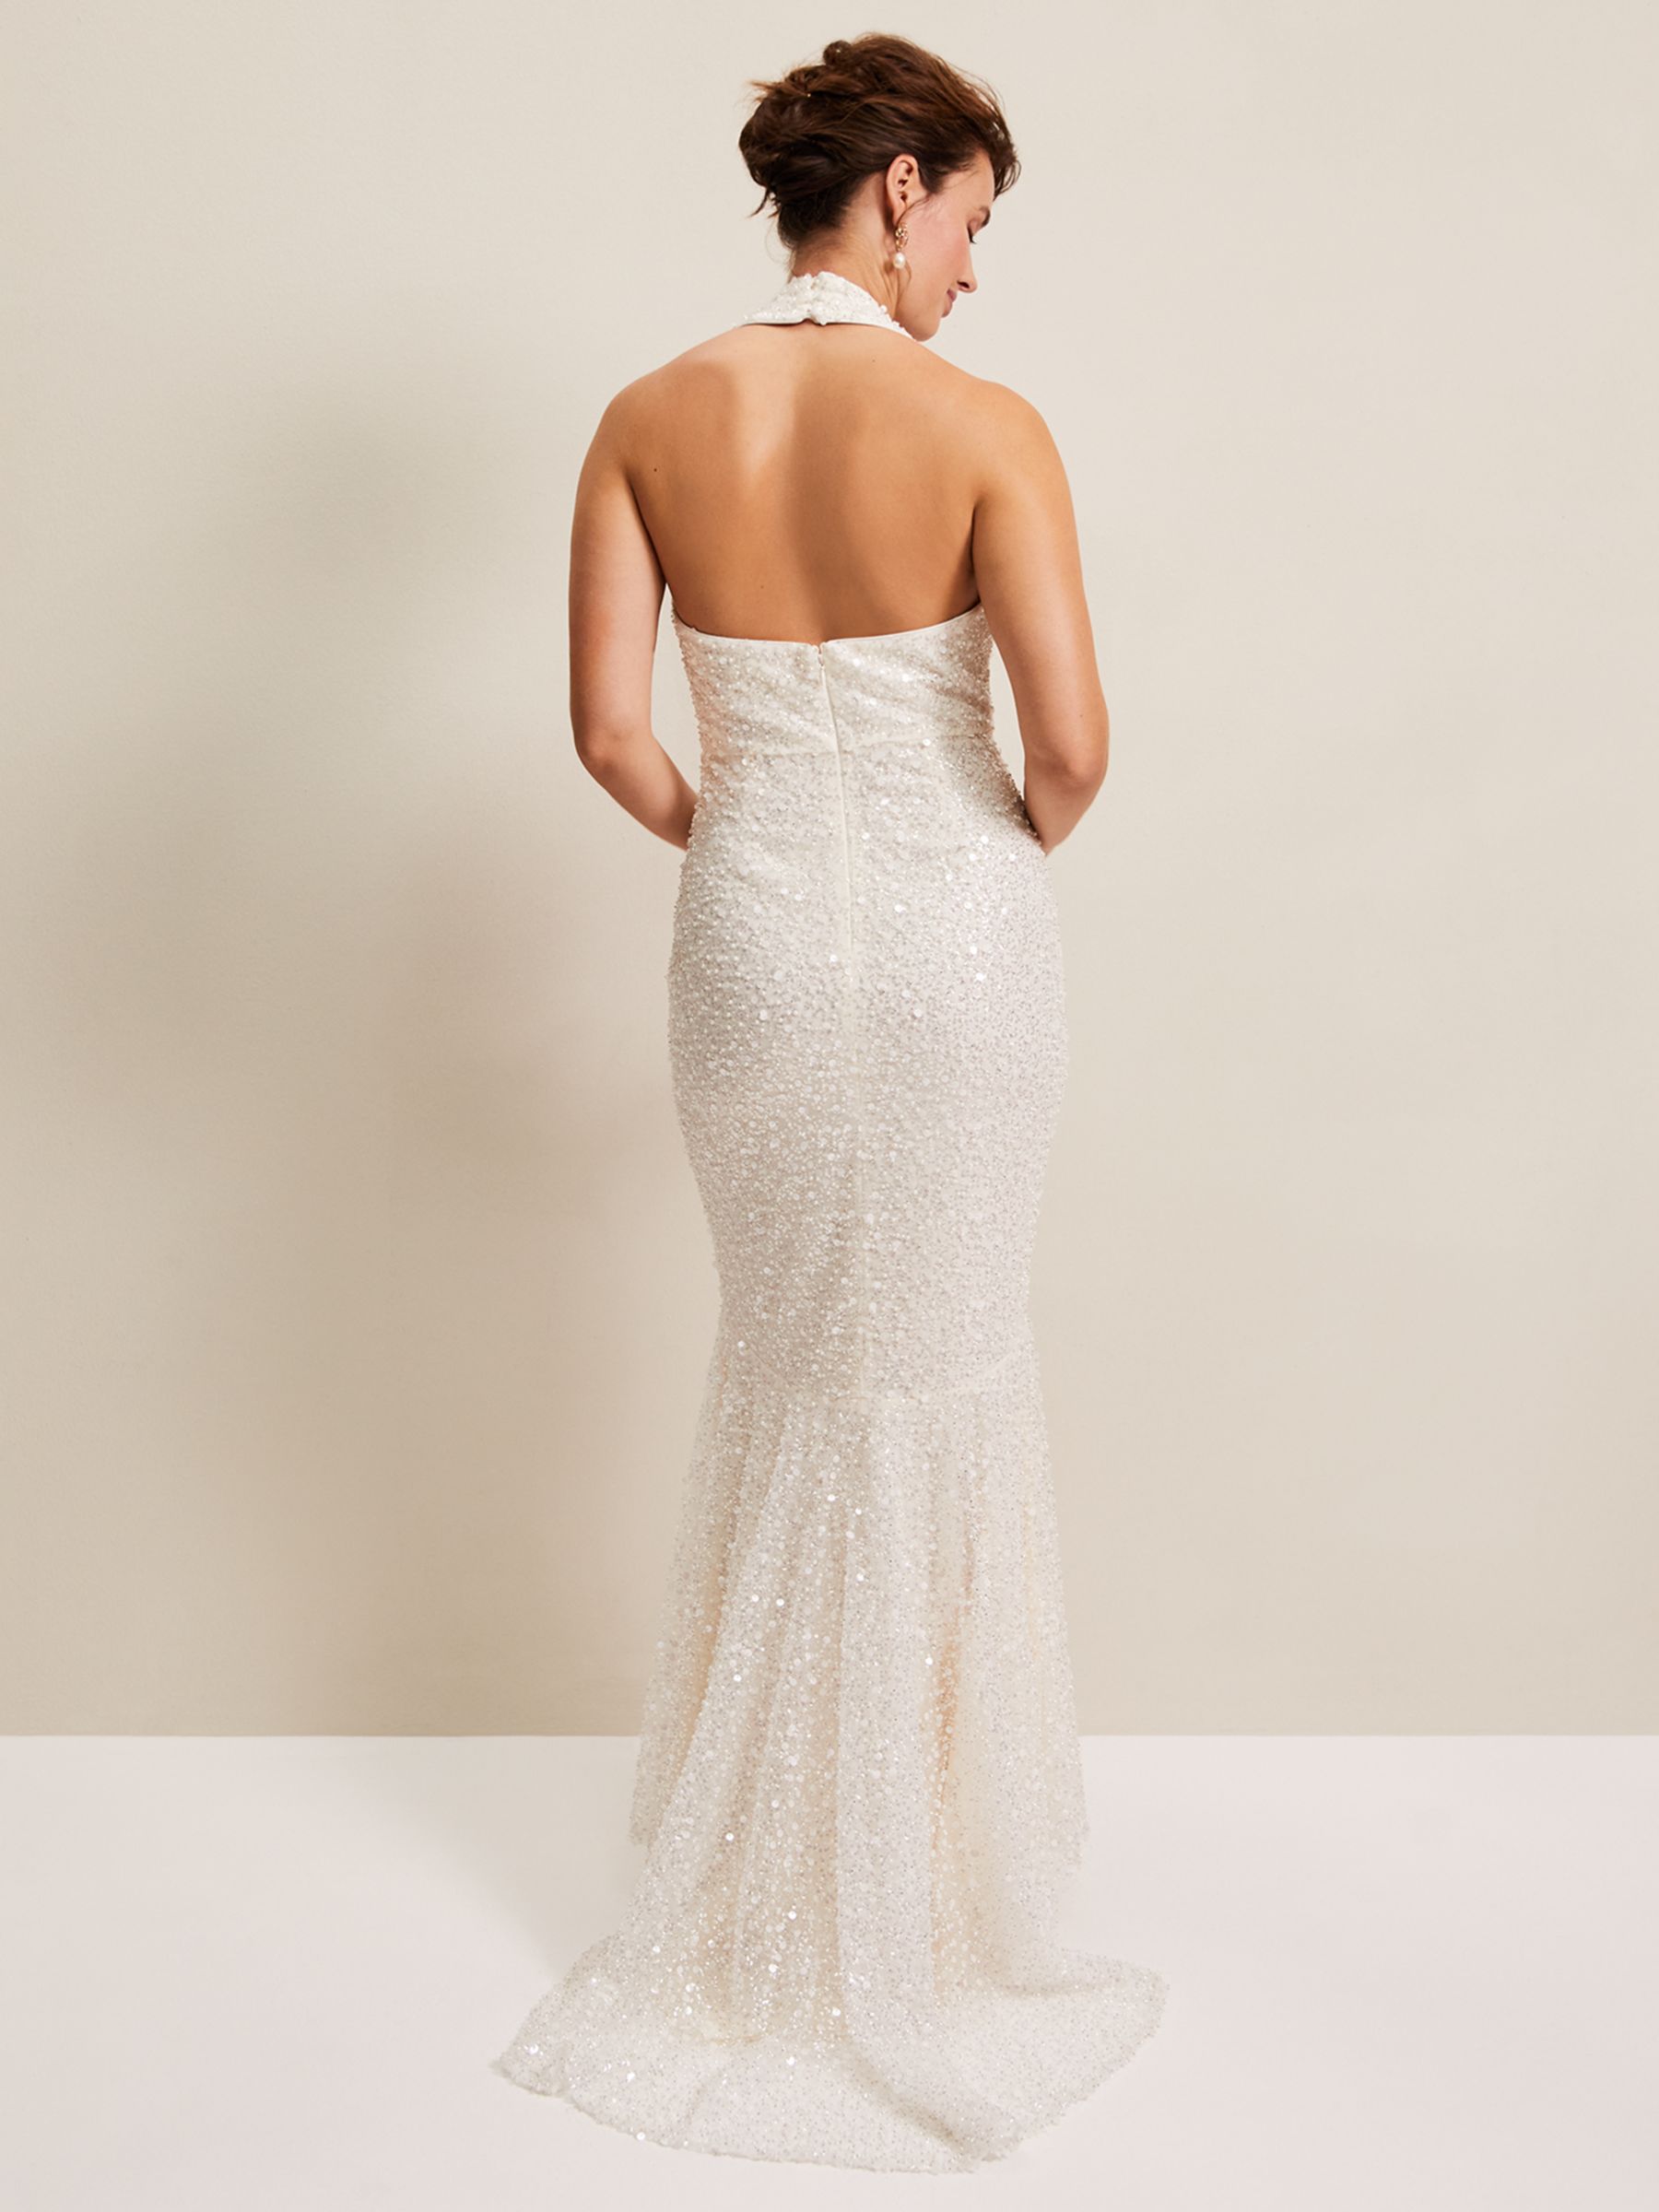 Buy Phase Eight Guinevere Sequin Wedding Dress, Ivory Online at johnlewis.com